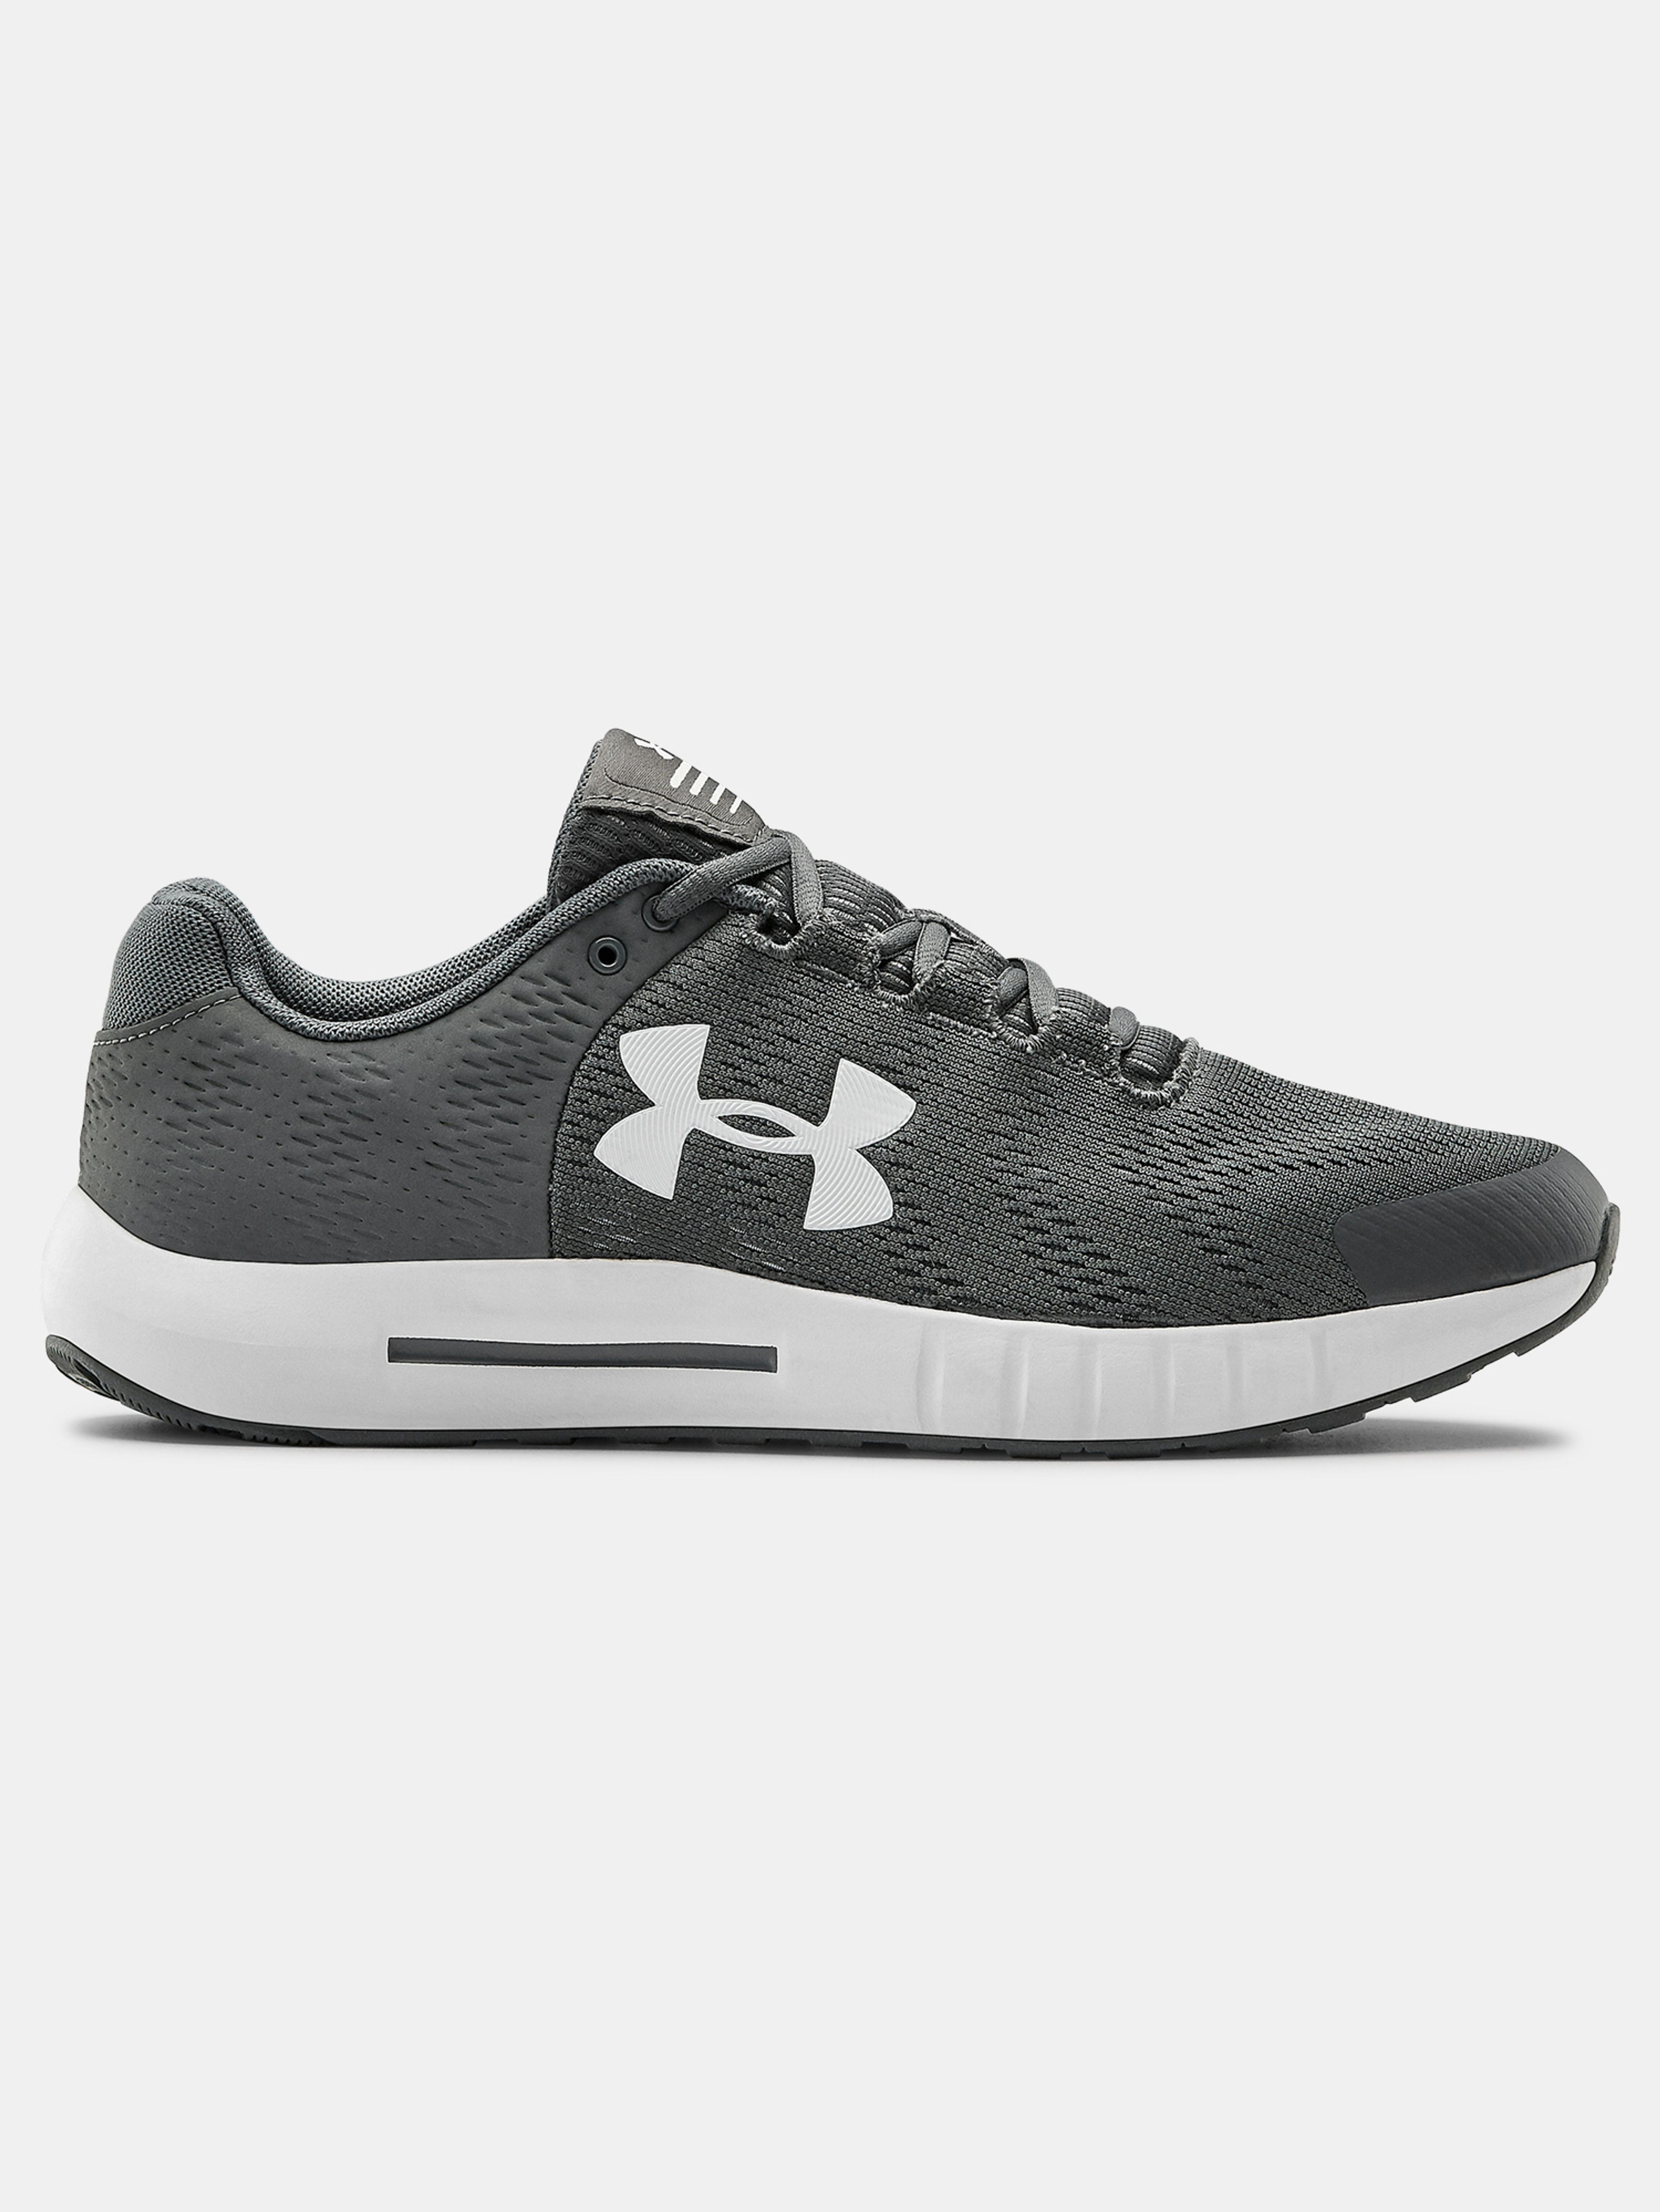 Boty Under Armour Micro G Pursuit BP-GRY